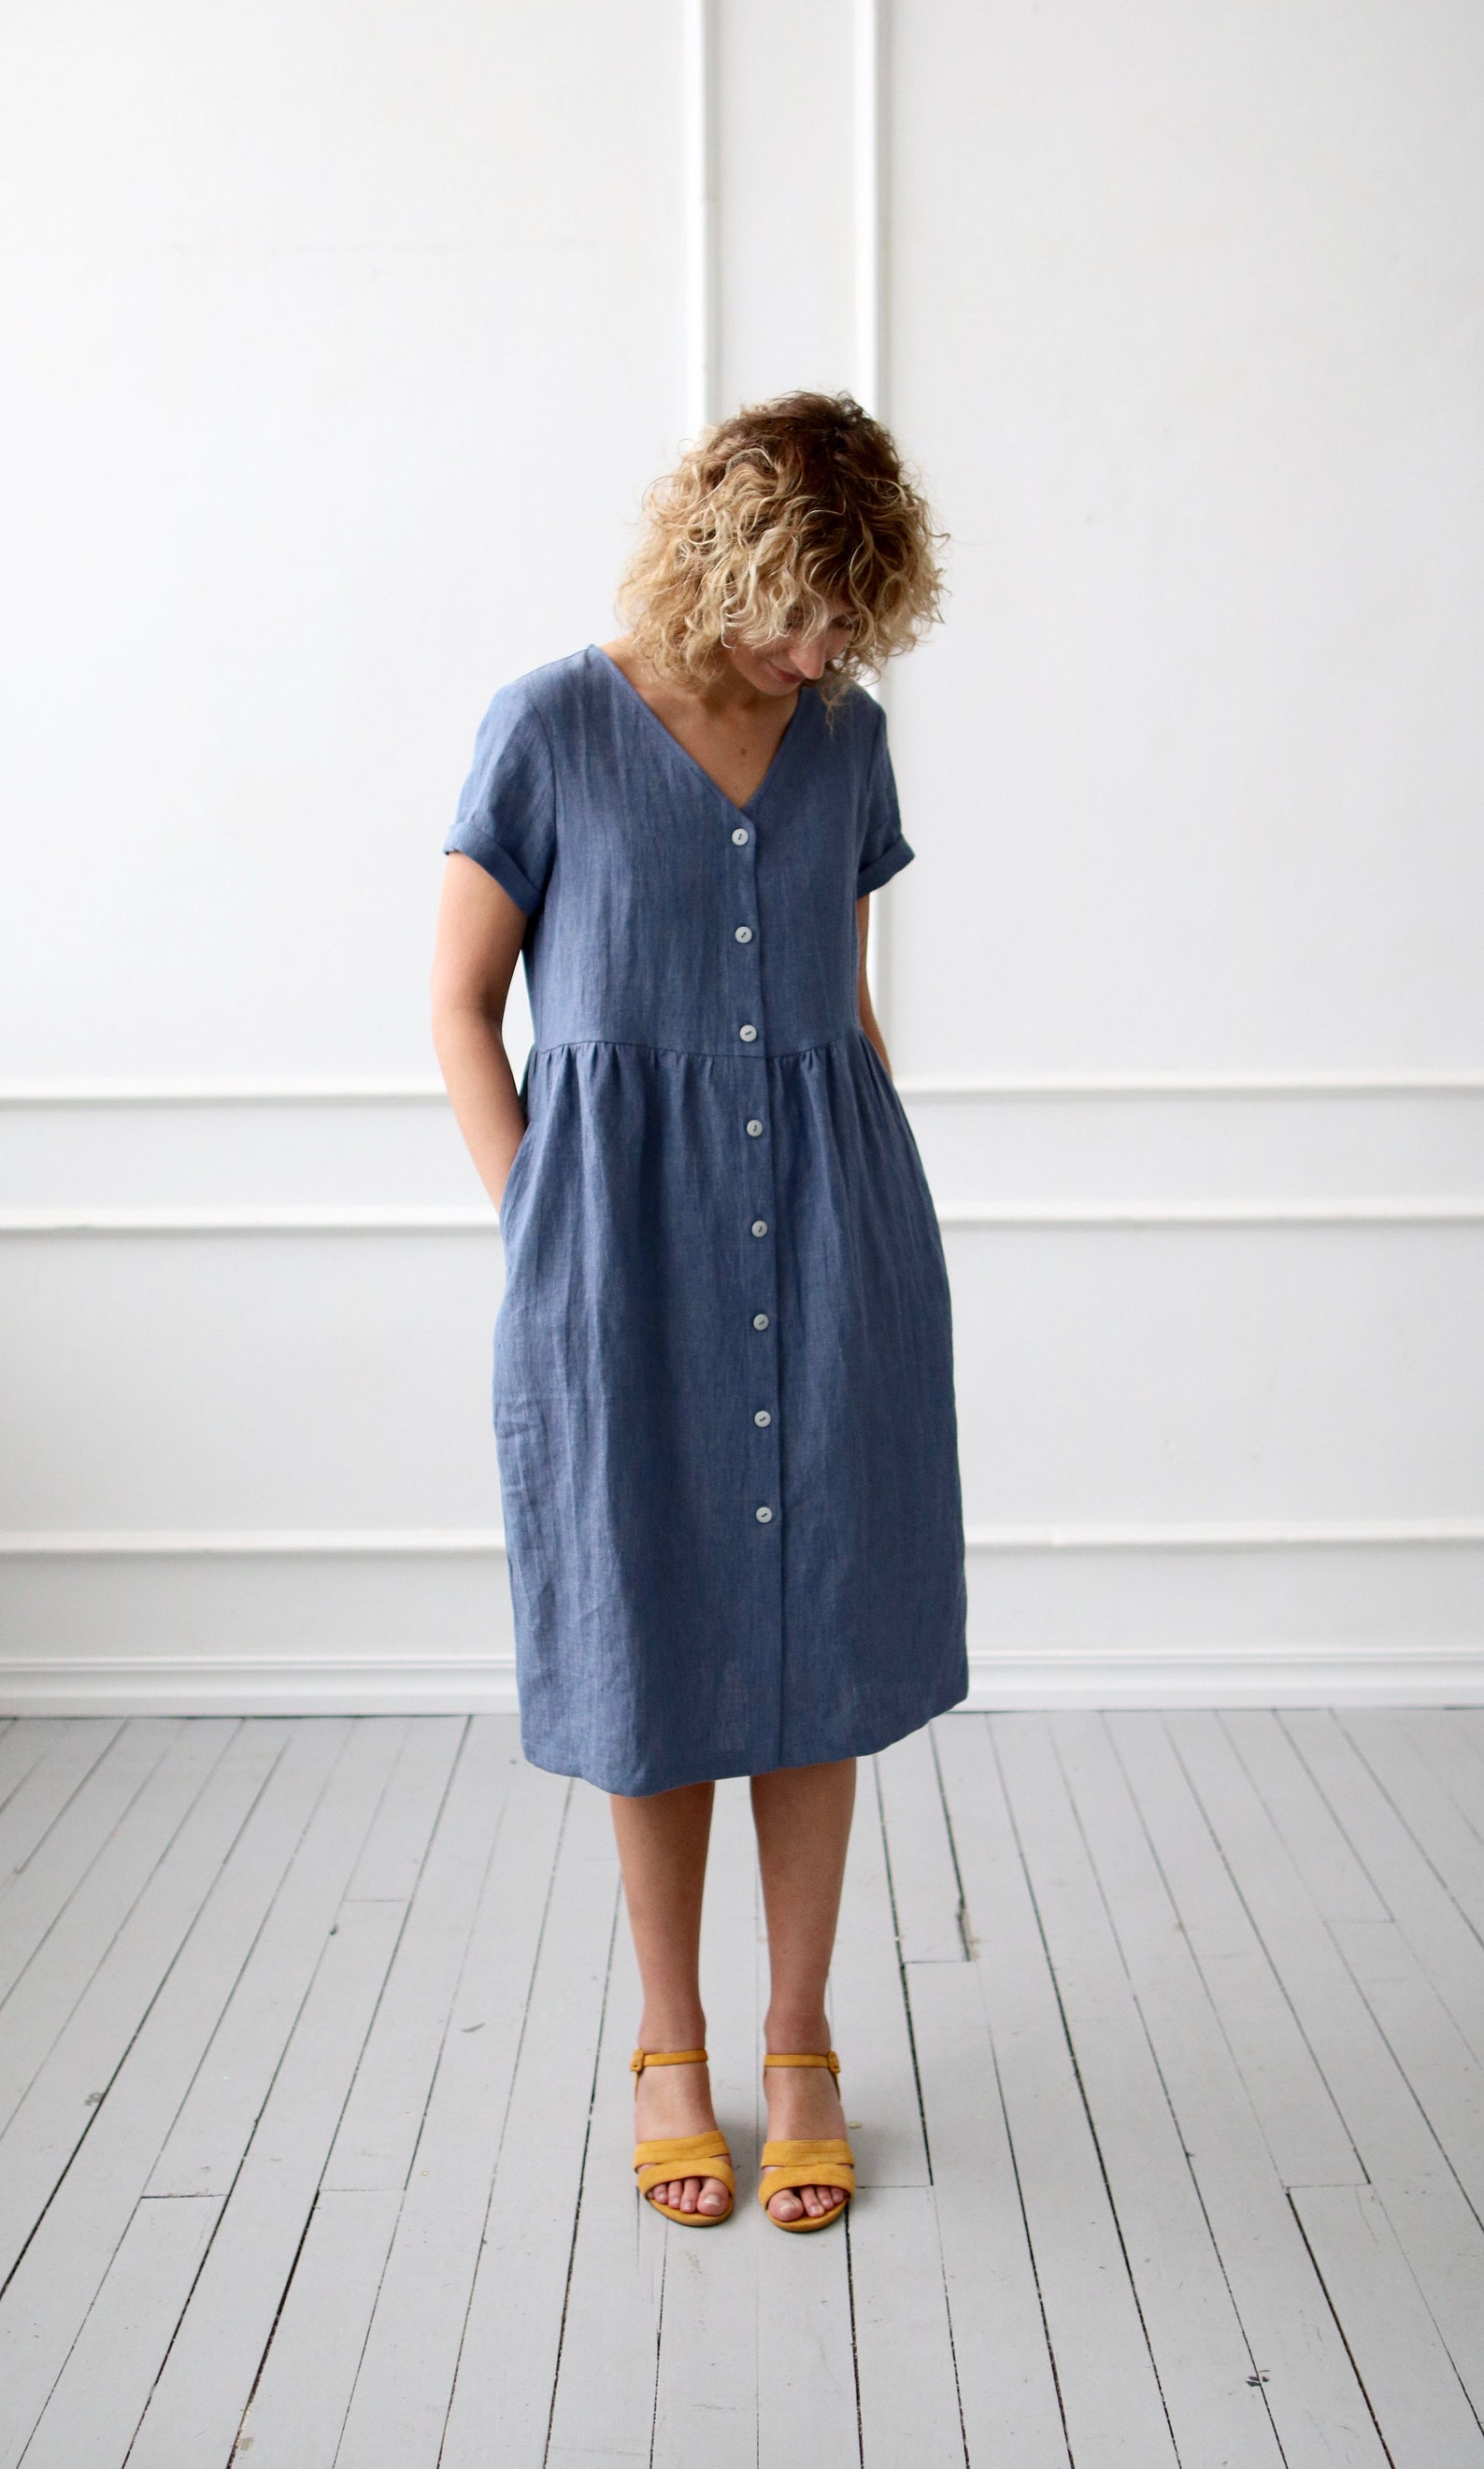 Linen Dress With Button Closure in Denim Blue Color/offon - Etsy